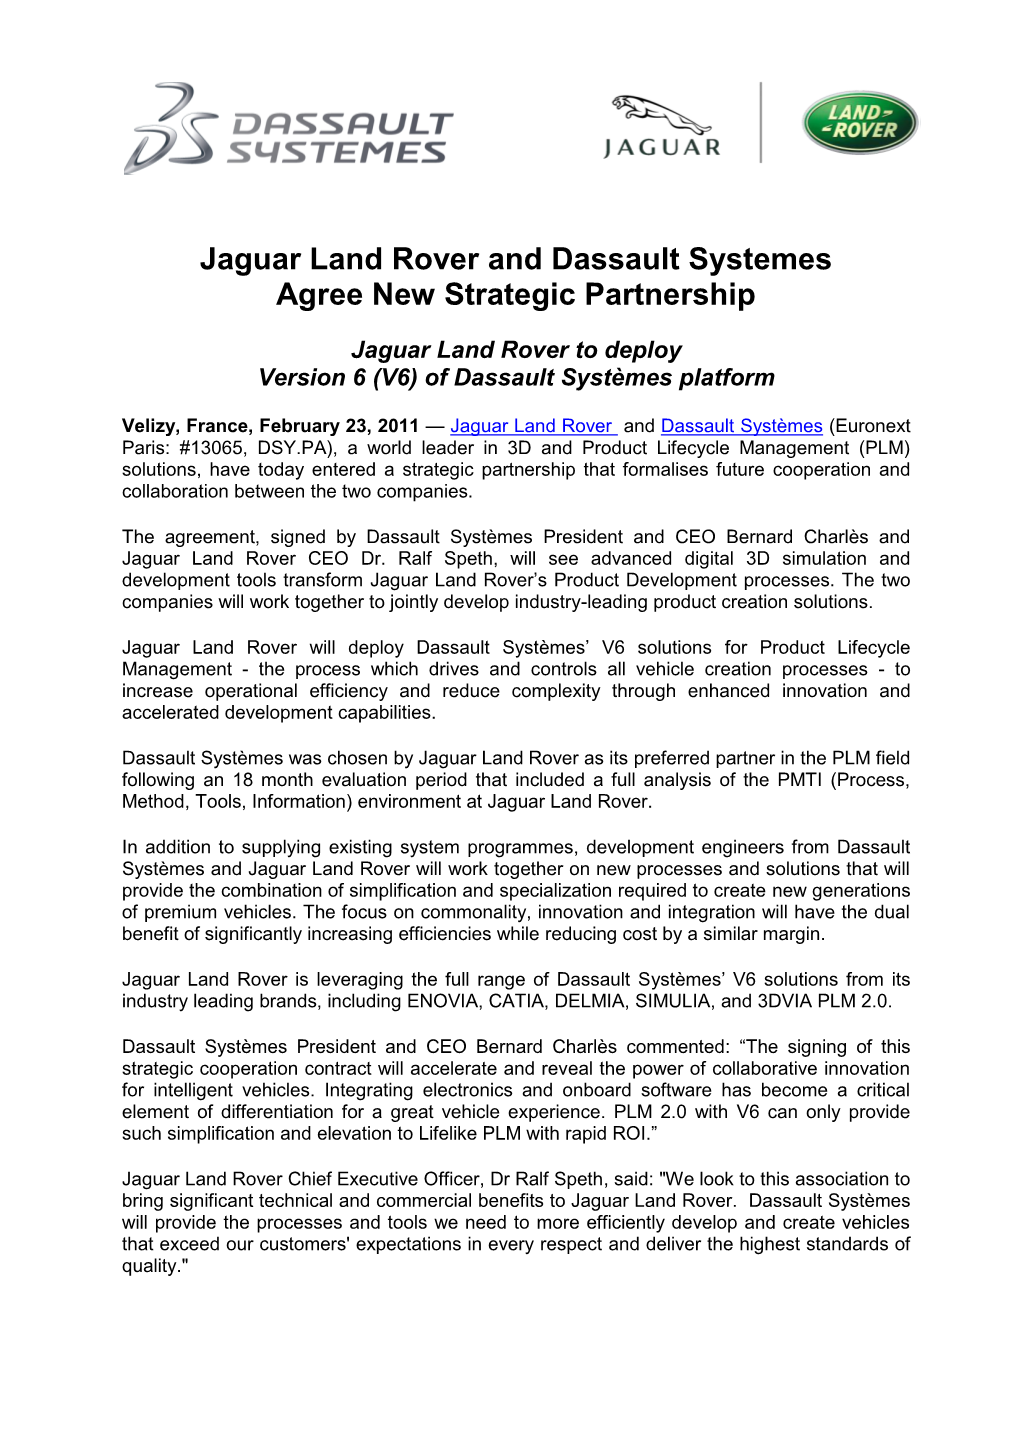 Jaguar Land Rover Signs Five-Year Contract Withfor Dassault Systèmes